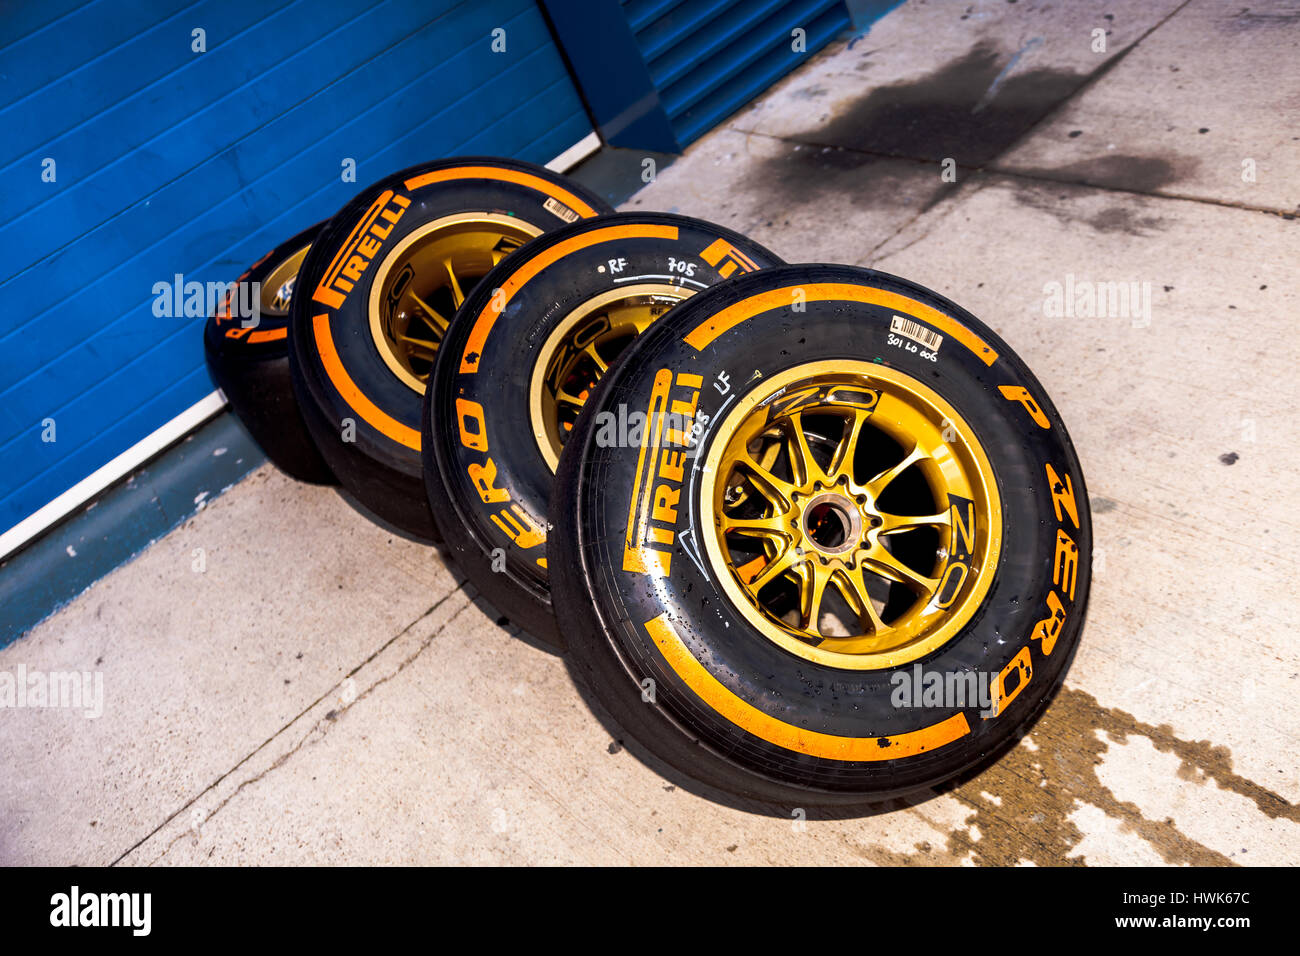 JEREZ DE LA FRONTERA, SPAIN - FEB 08: Exposition of the several pneumatic tires Pirelli after be used on a test session on February 08 , 2013, in Jere Stock Photo